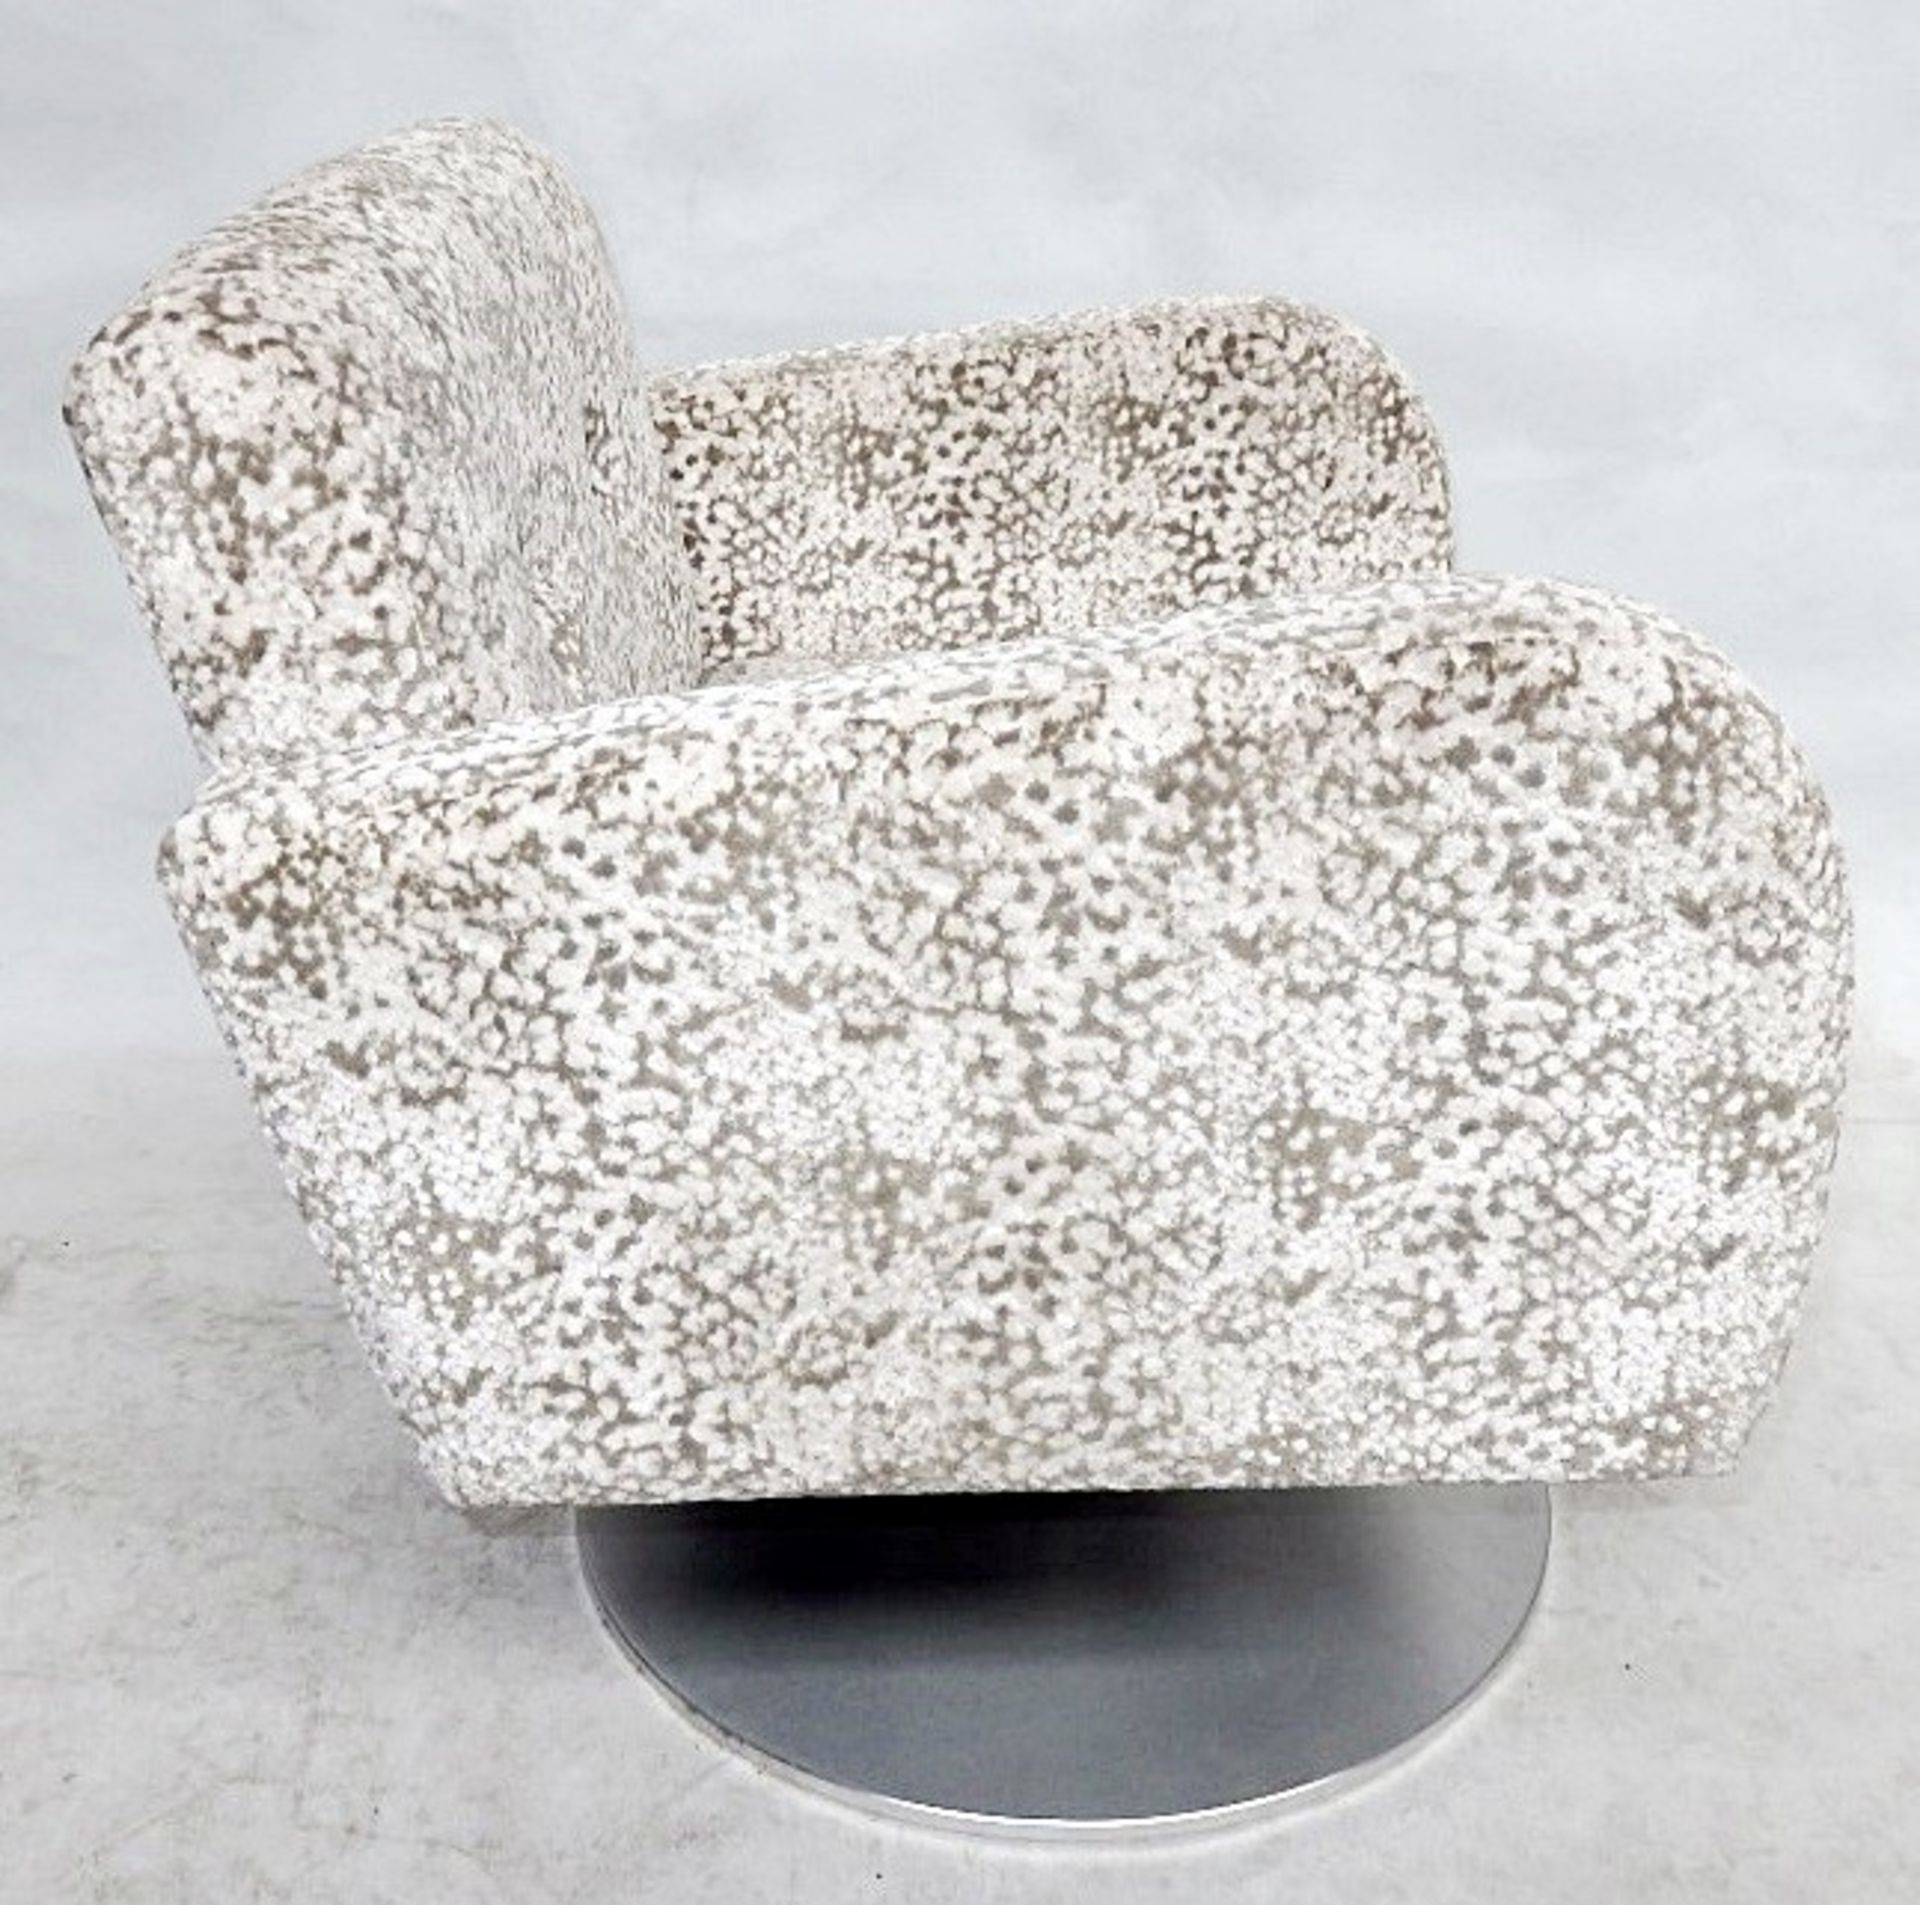 1 x Small Bespoke Swivel Chair - Upholstered In A Rich Mottled Chenille - Dimensions: W x H x D cm - - Image 4 of 5